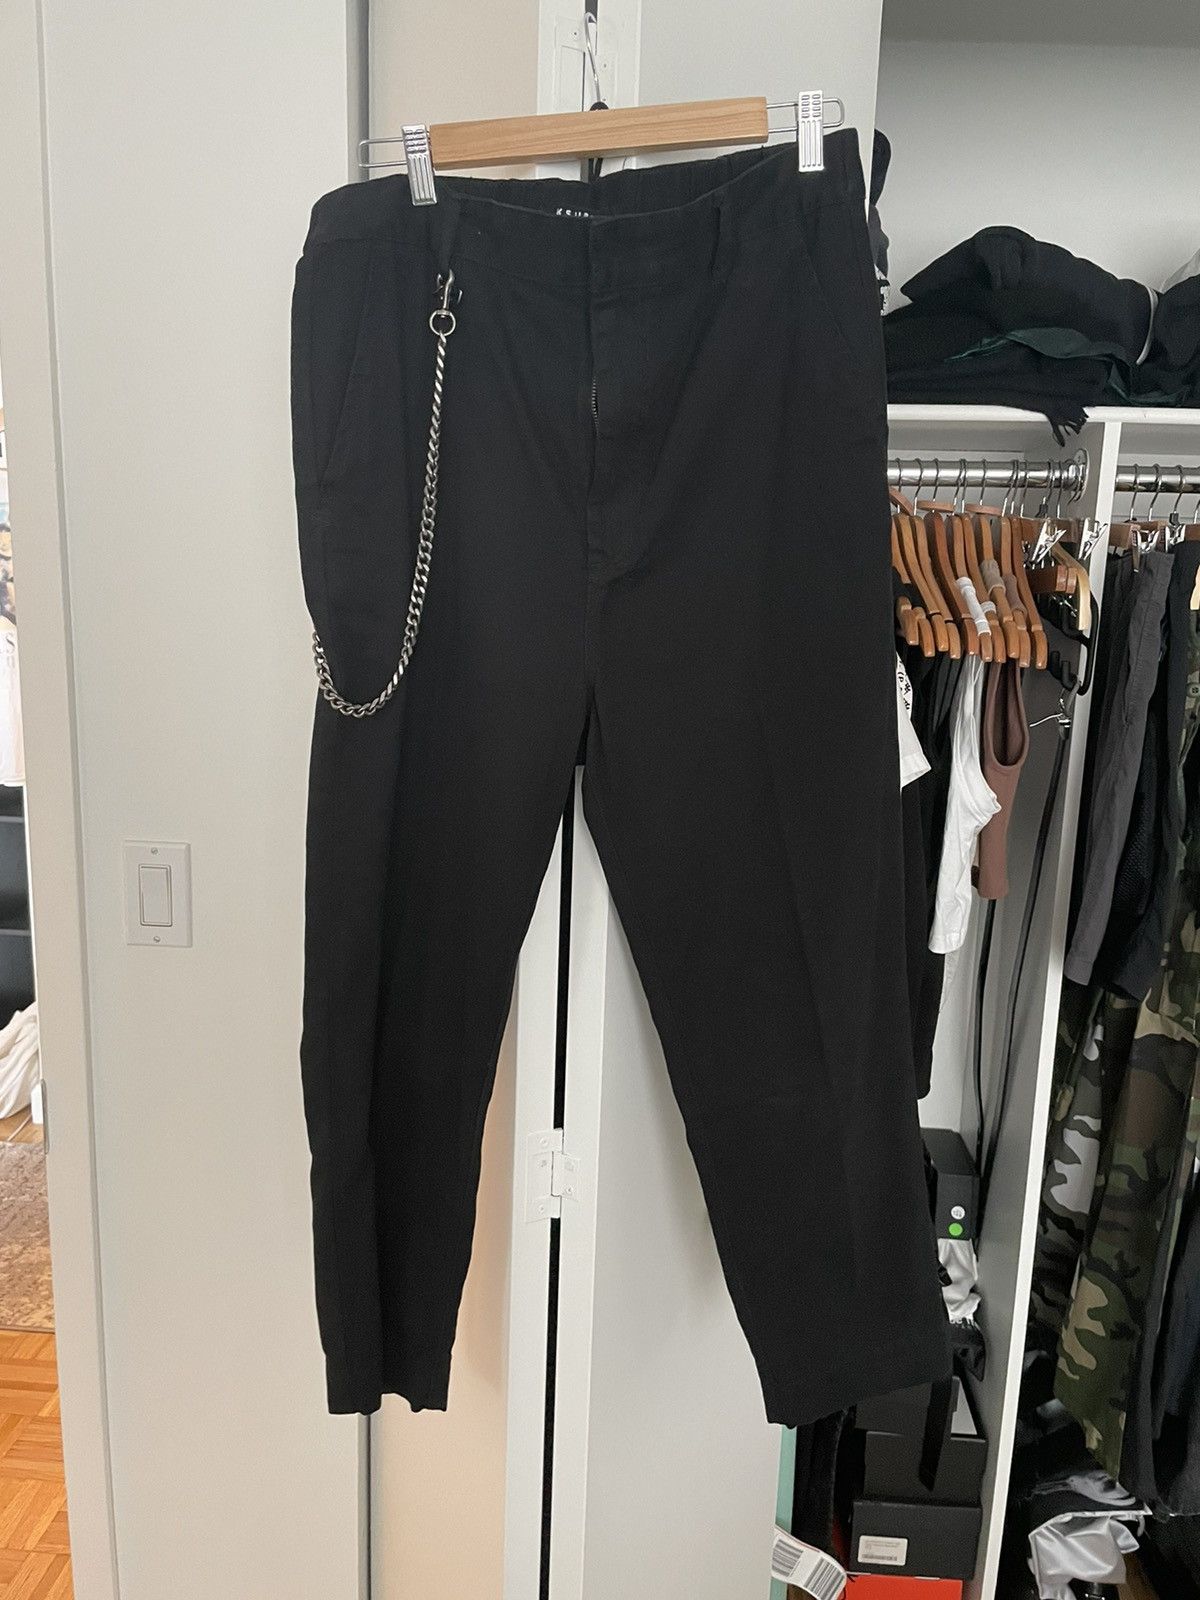 Ksubi Cropped “Sid” Trousers with Chain | Grailed